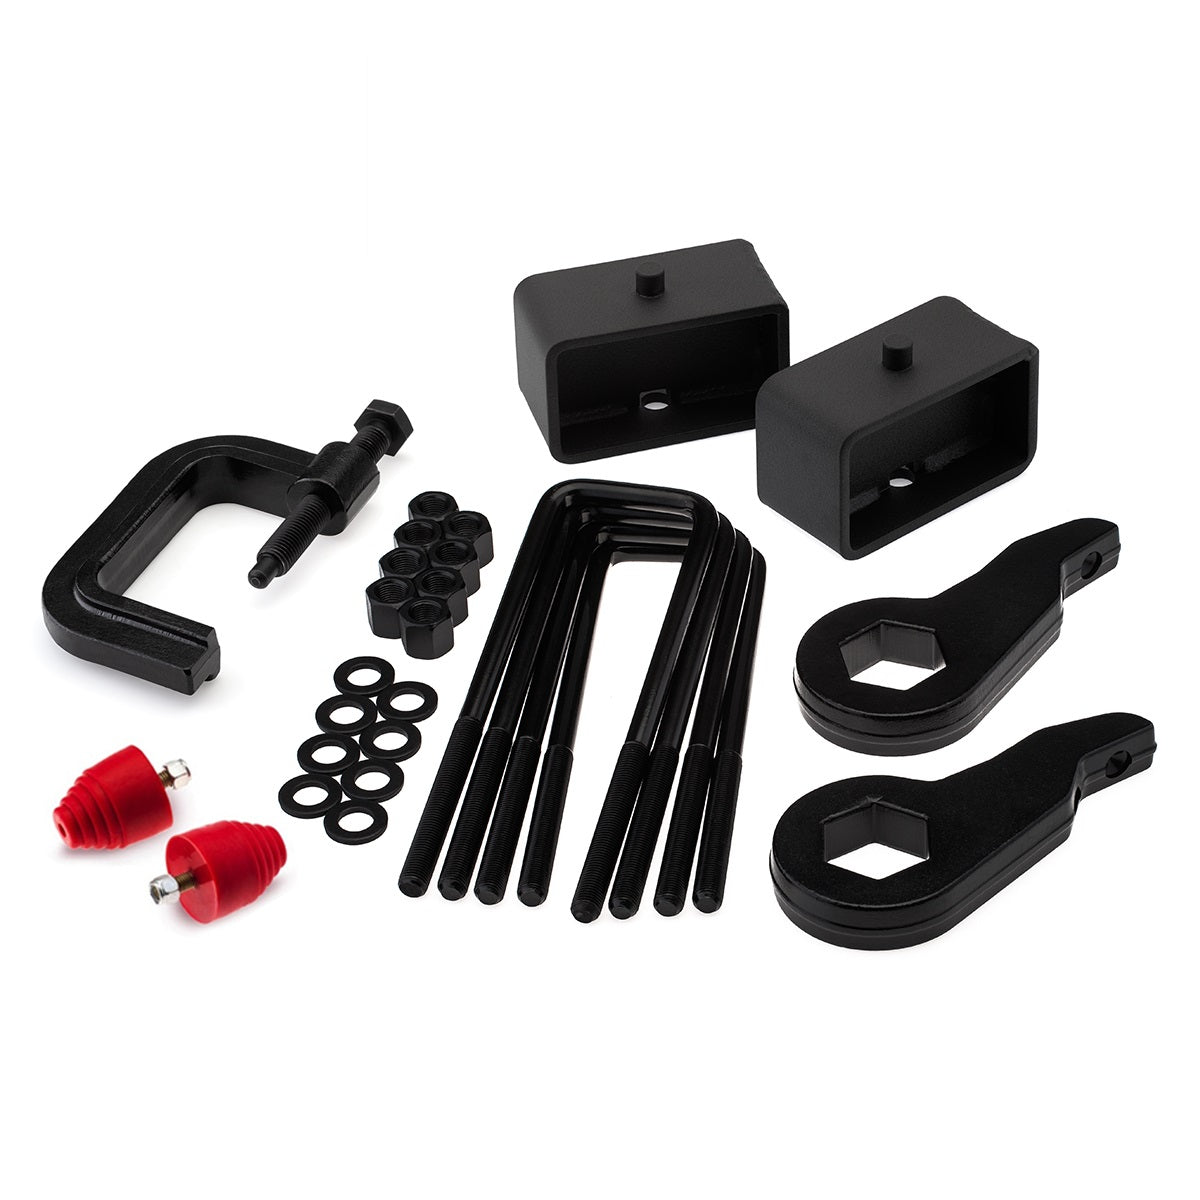 1999-2007 Chevy Silverado 1500 4WD Full Lift Kit with Bump Stops and Torsion Key Unloading/Removal Tool